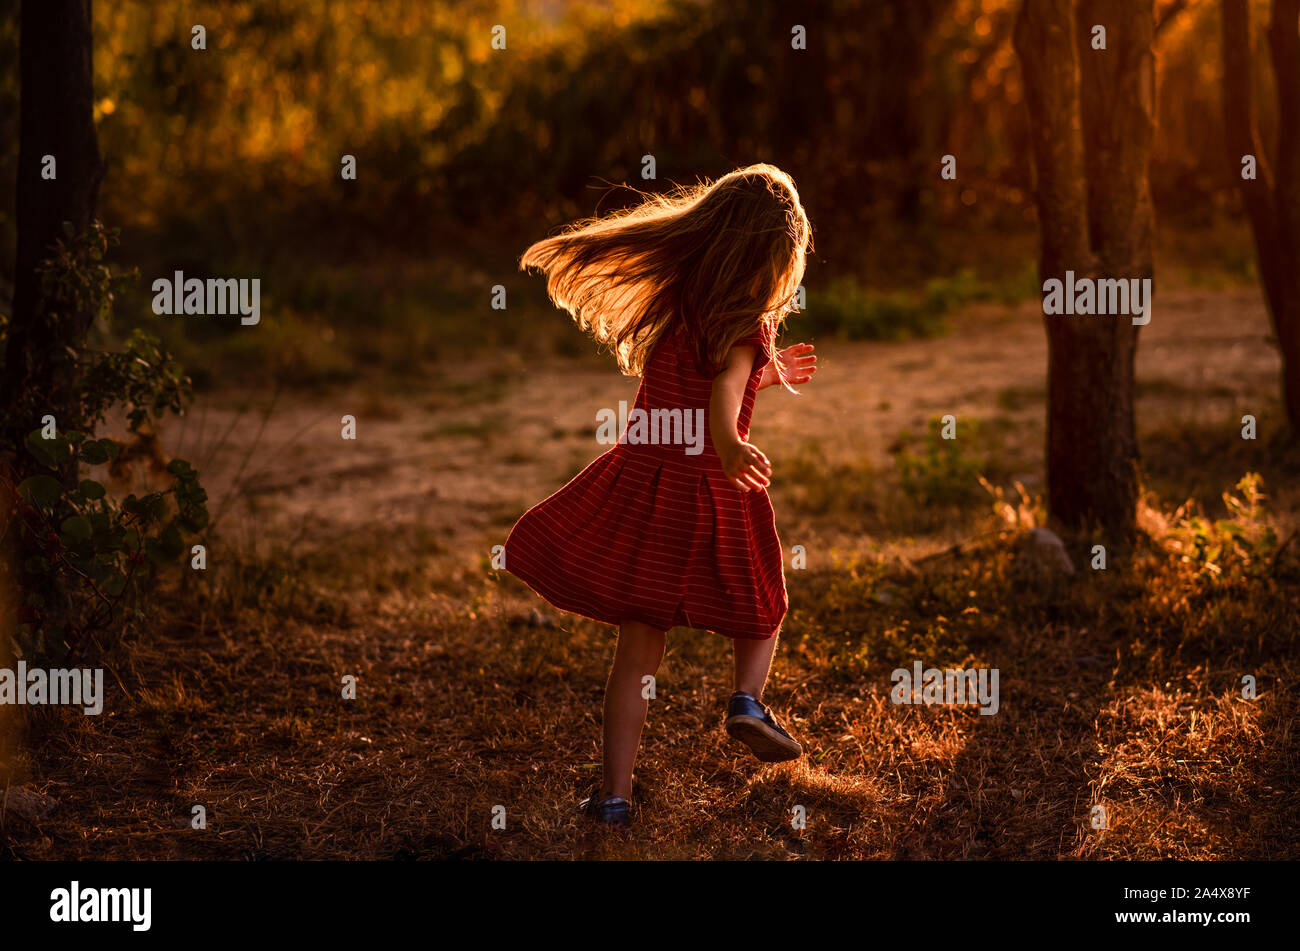 Girl runs through trees with light behind her Stock Photo